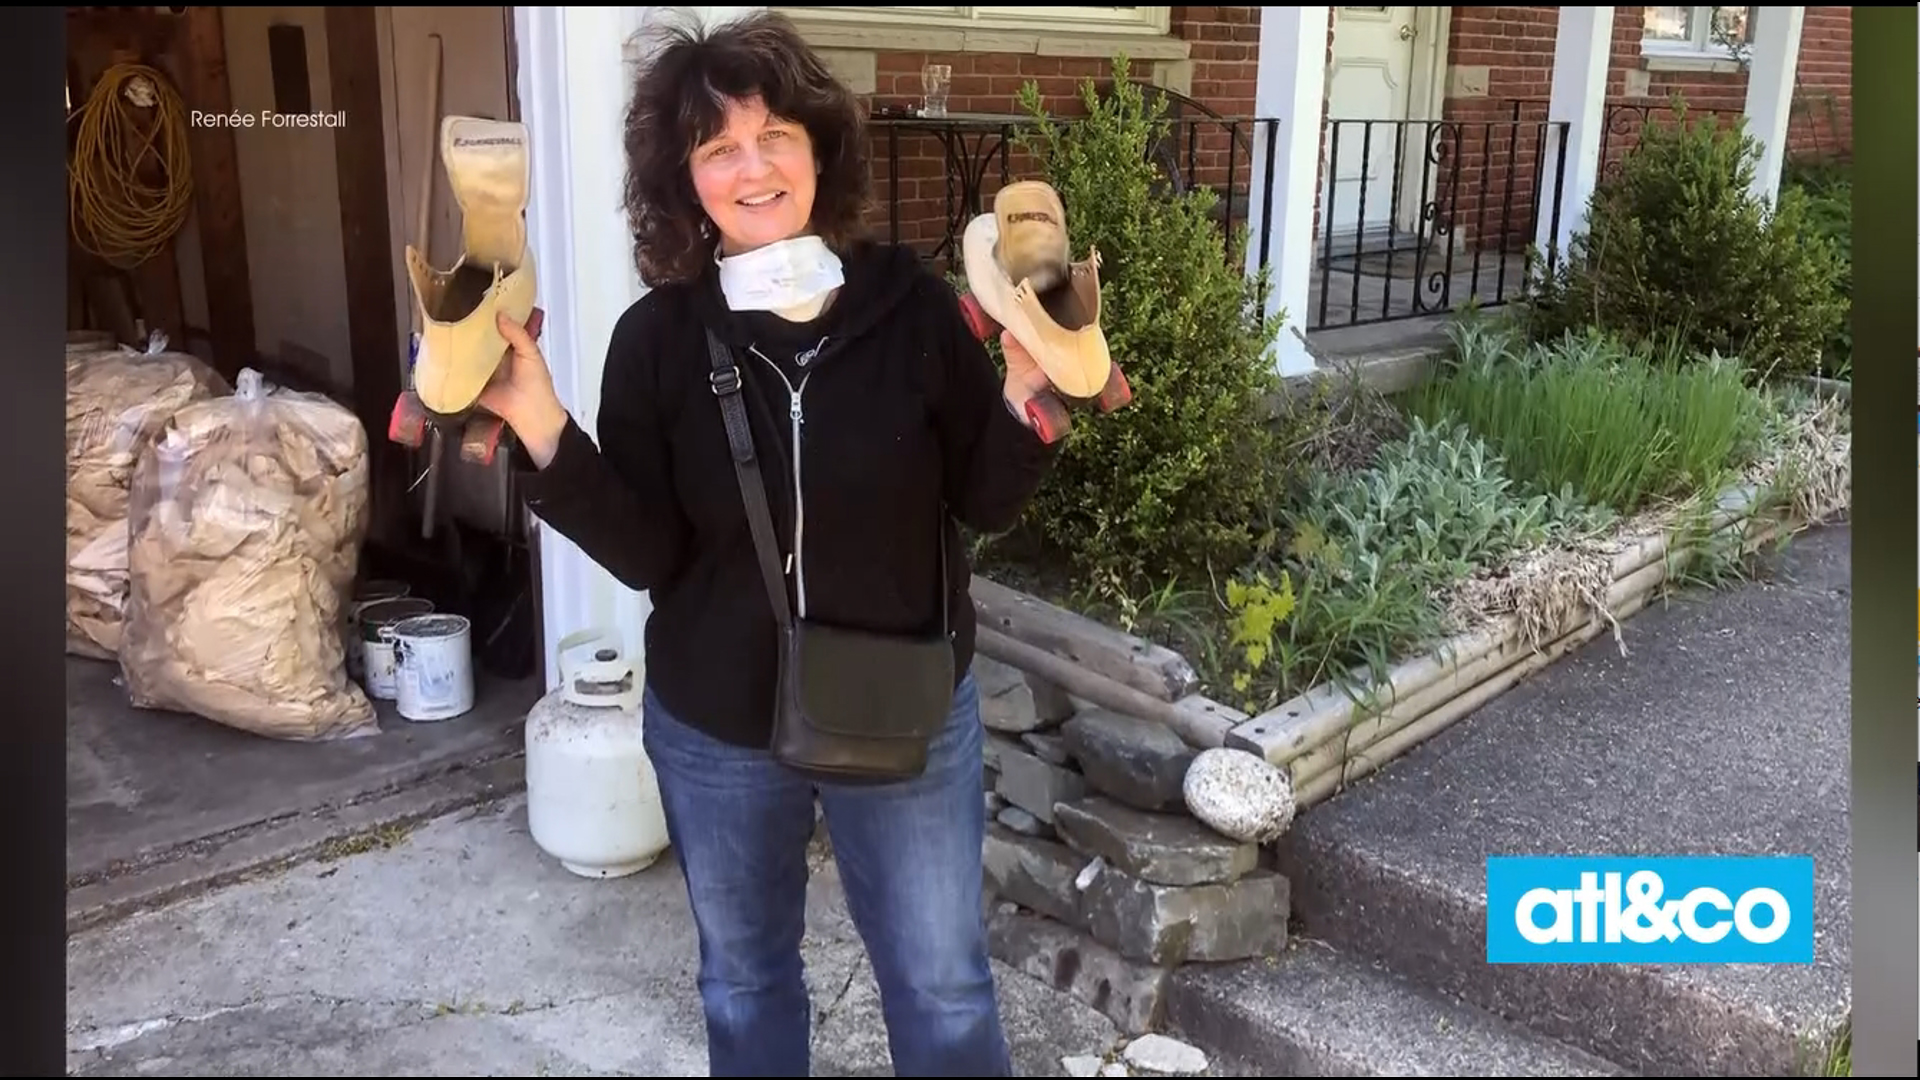 A high school art teacher stumbled upon the same pair of roller skates she'd spent countless hours on as a teenager.